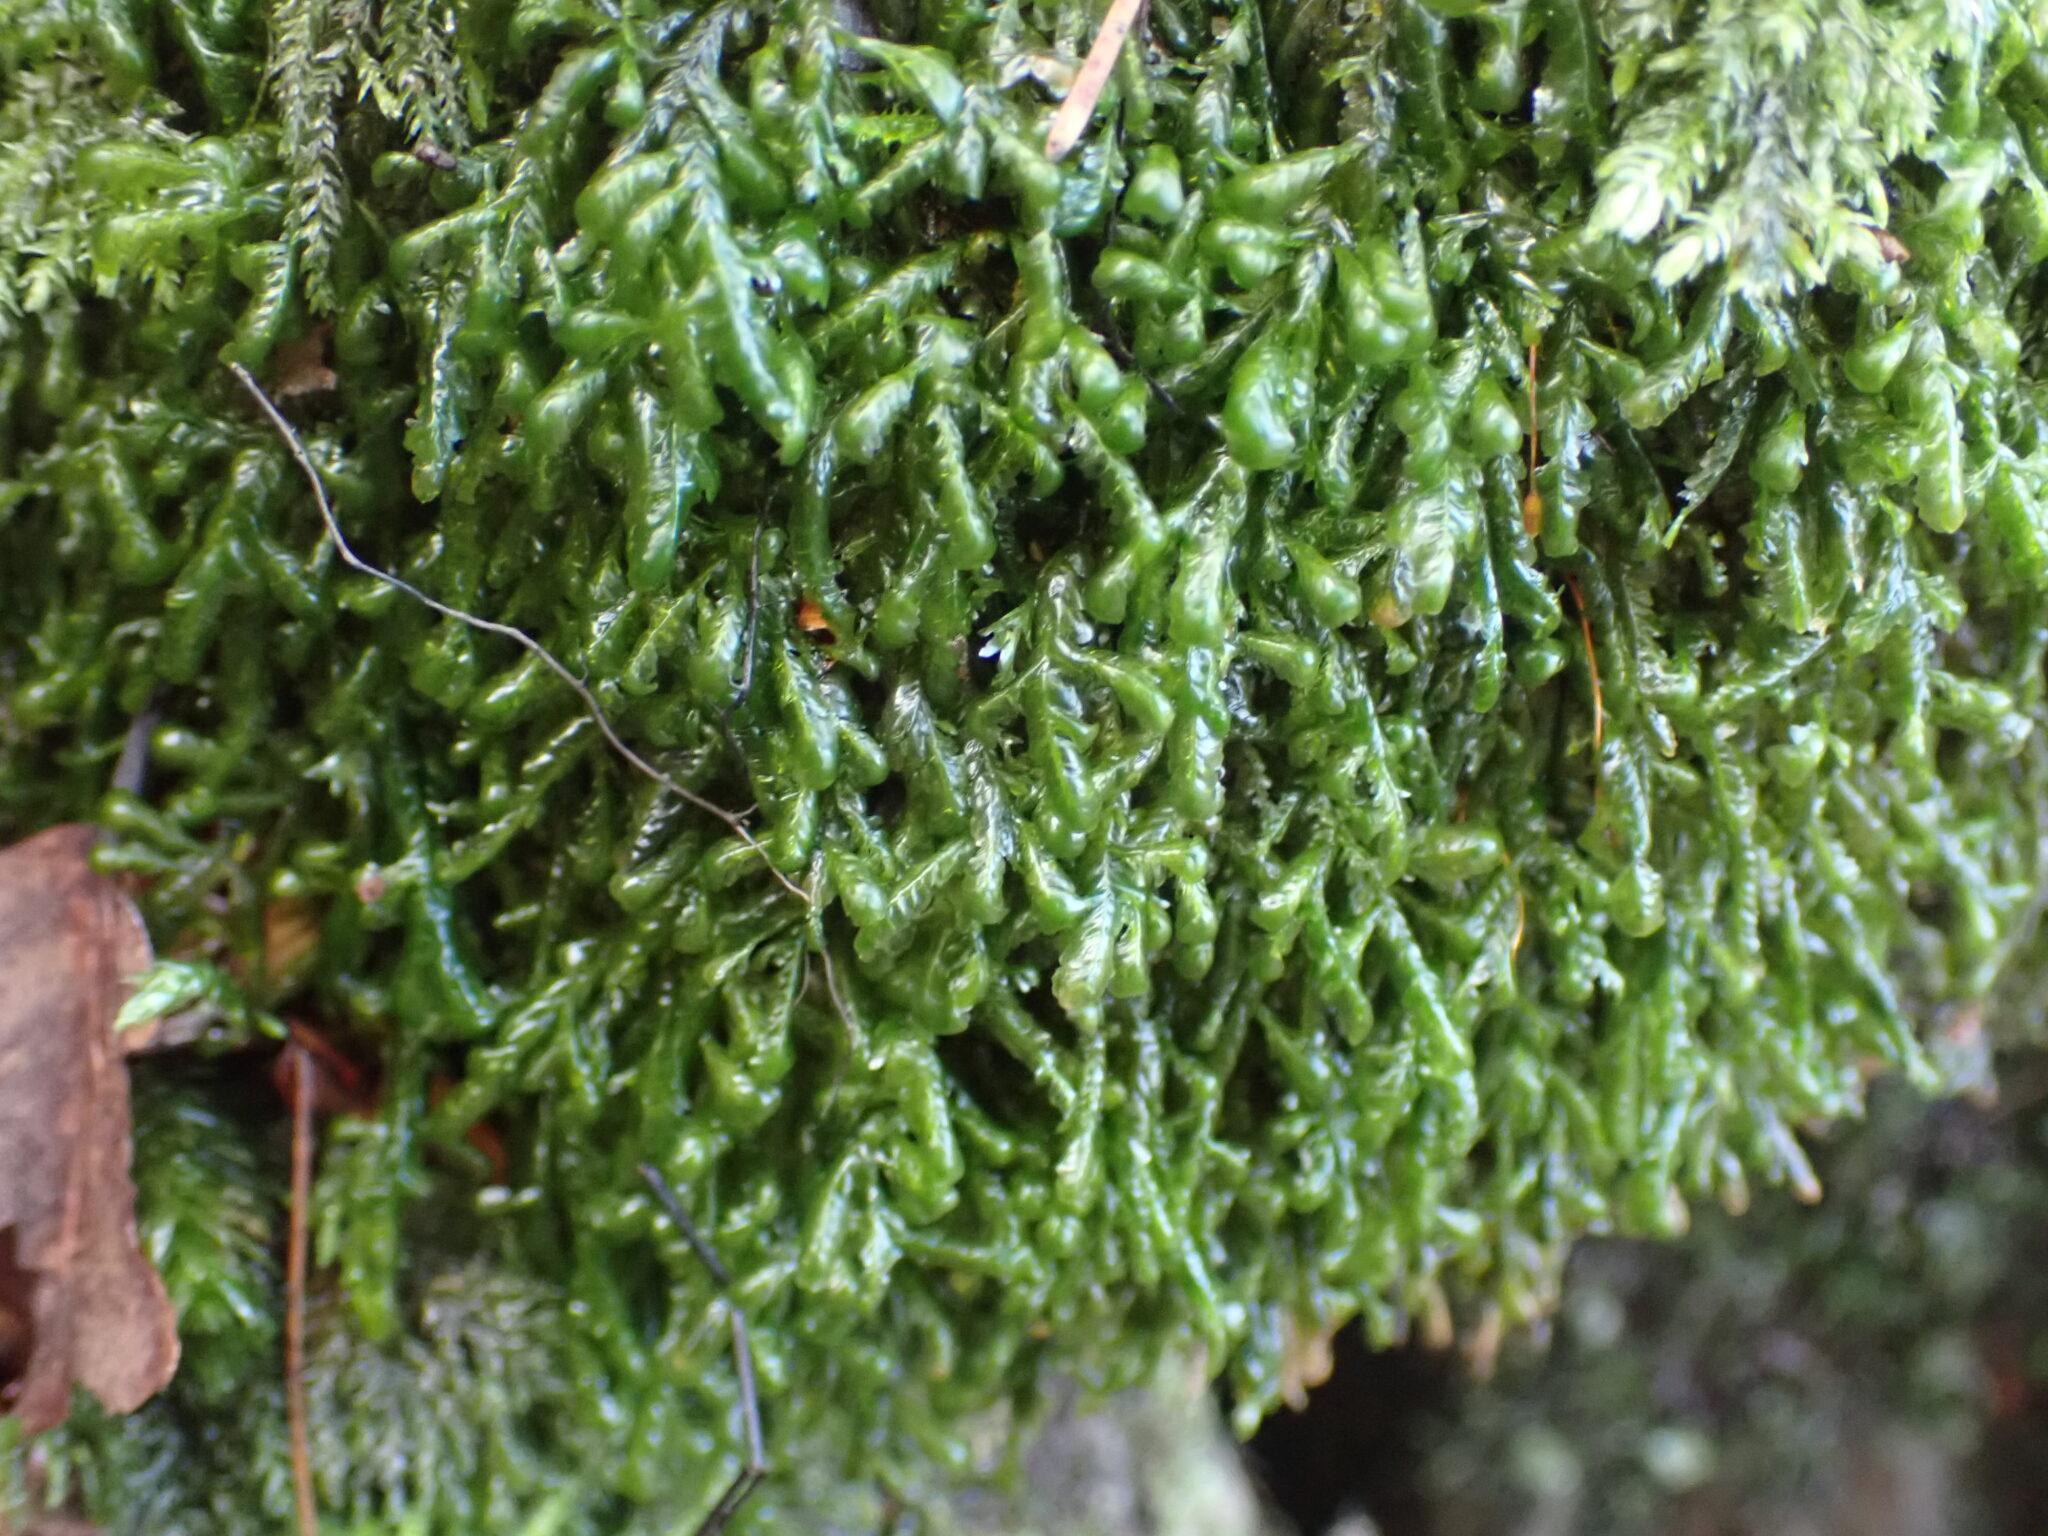 Blunt-Feather-moss-Homalia-trichomanoides-from-Allenbanks-Nature-Reserve-2048x1536.jpg